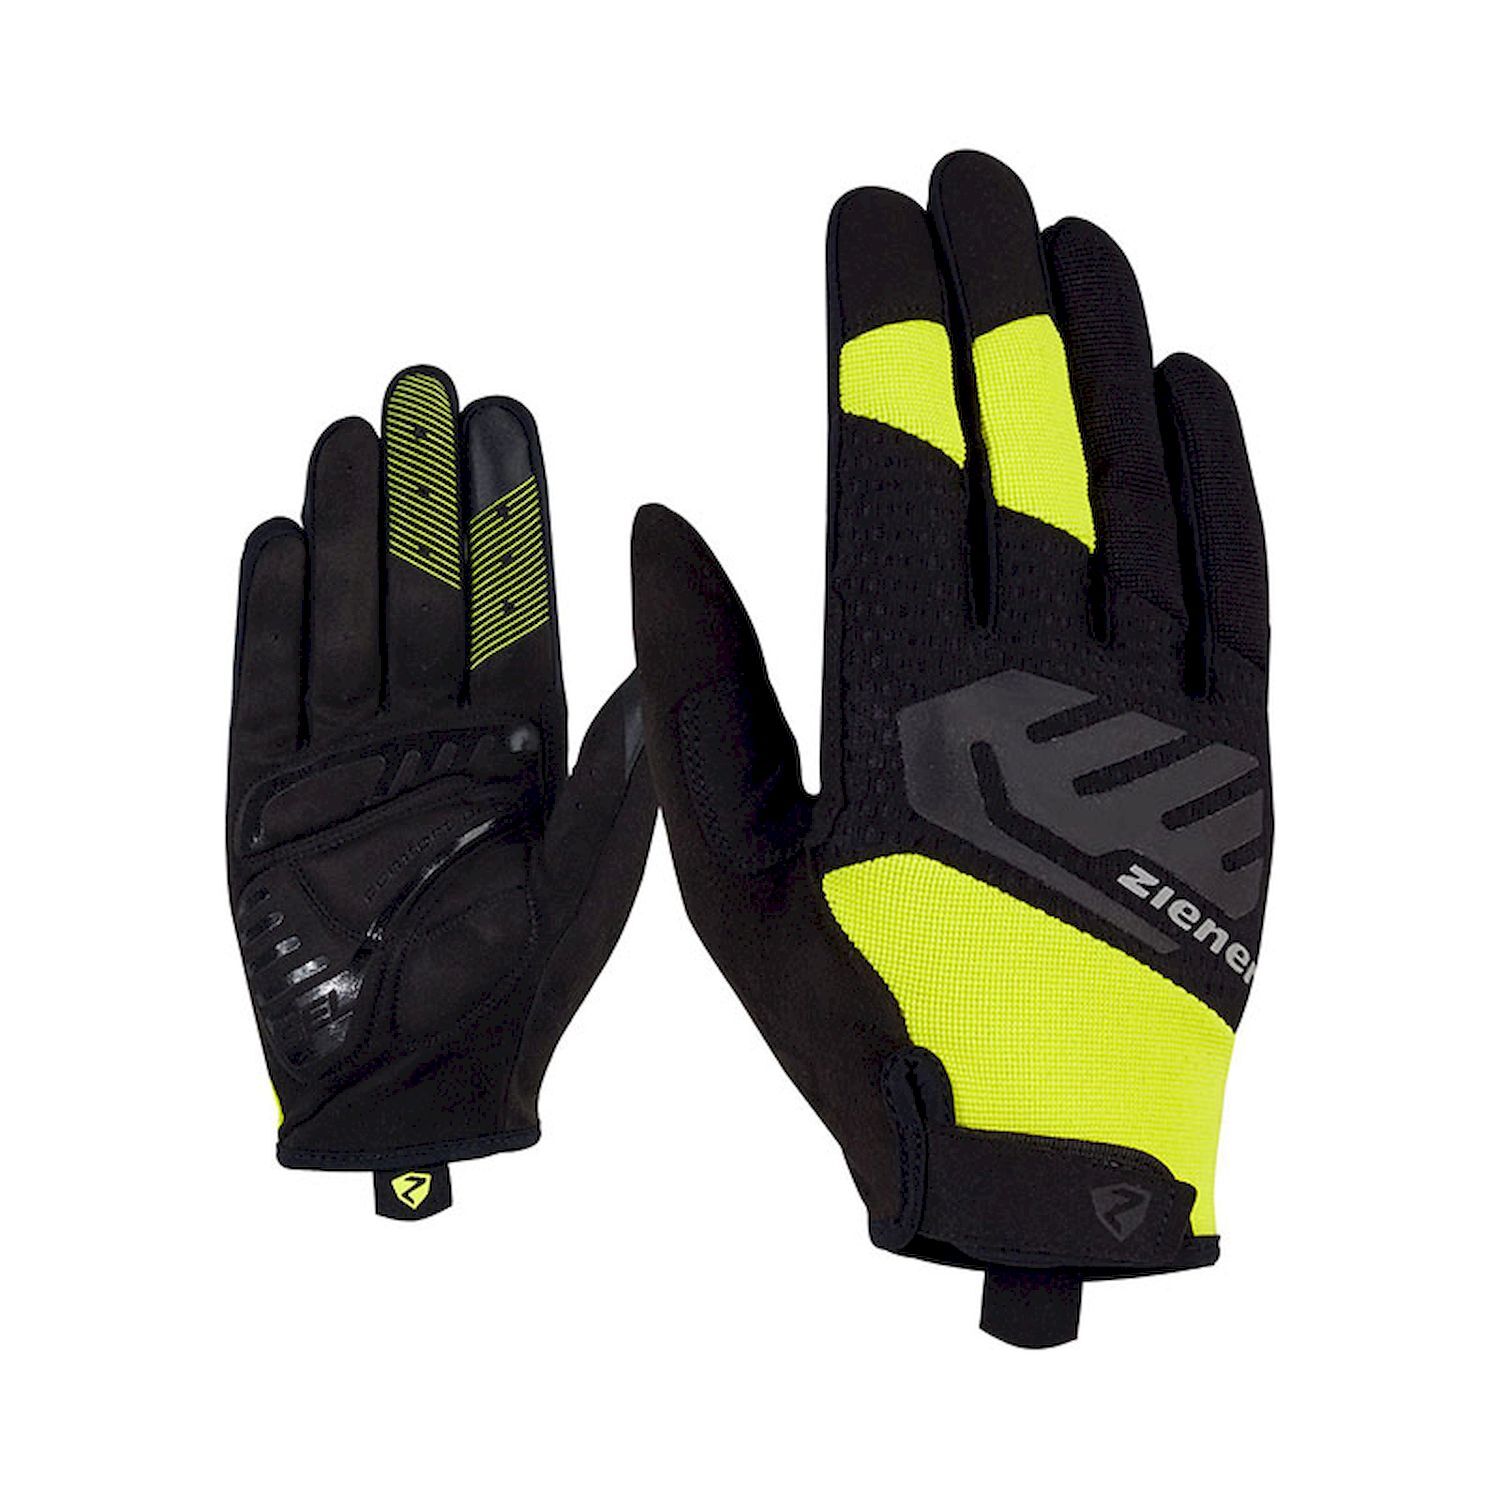 Ziener Ched Touch Long - Guanti ciclismo - Uomo